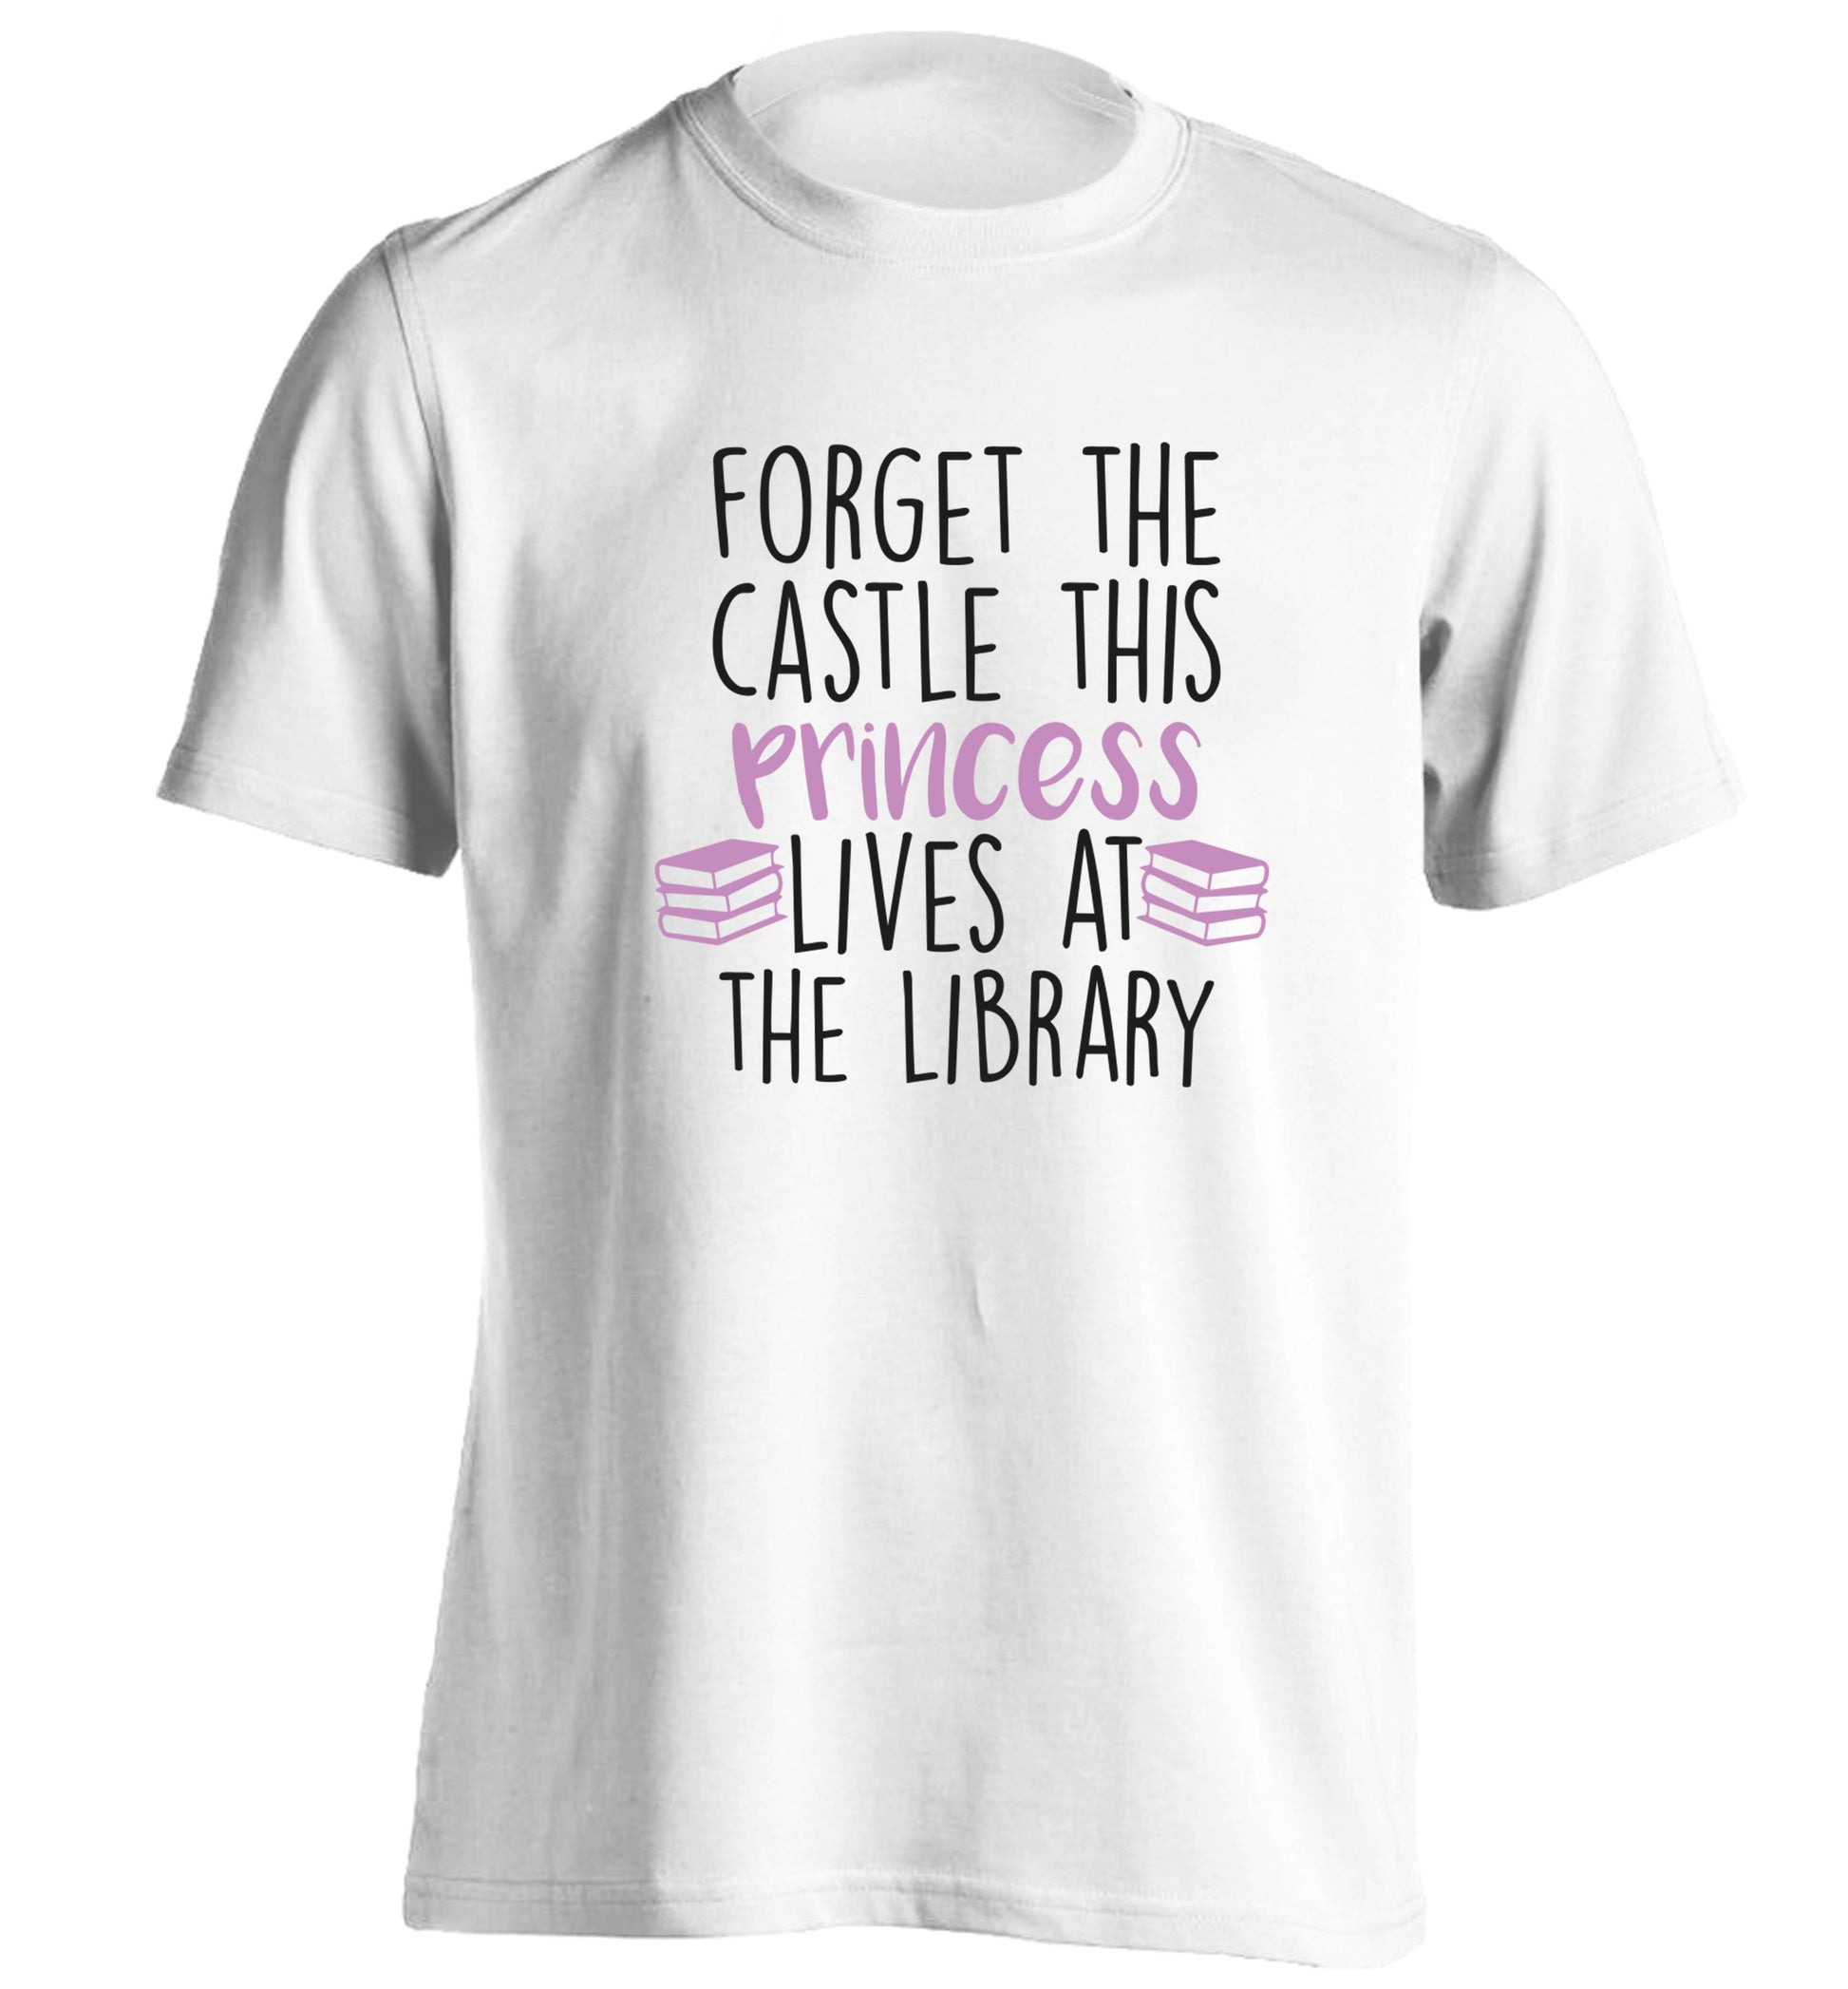 Forget the castle this princess lives at the library adults unisex white Tshirt 2XL